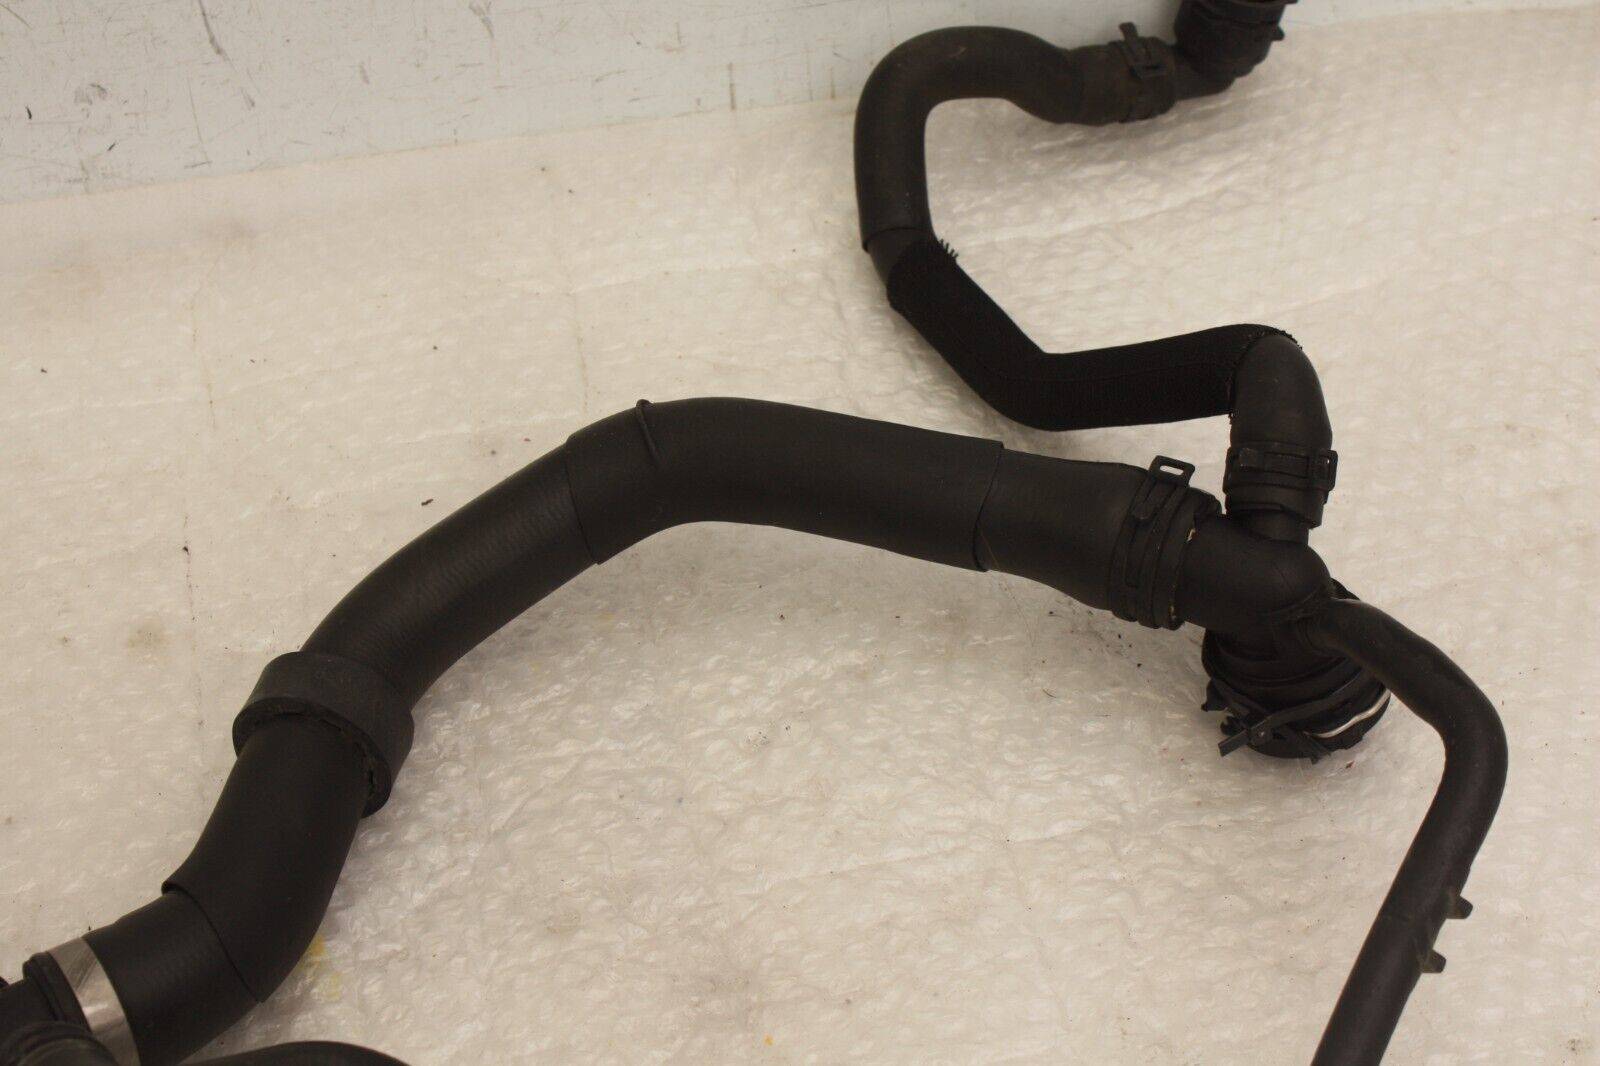 VW-Golf-Water-Coolant-Pipes-Hose-5Q0122101-Genuine-176375079536-10